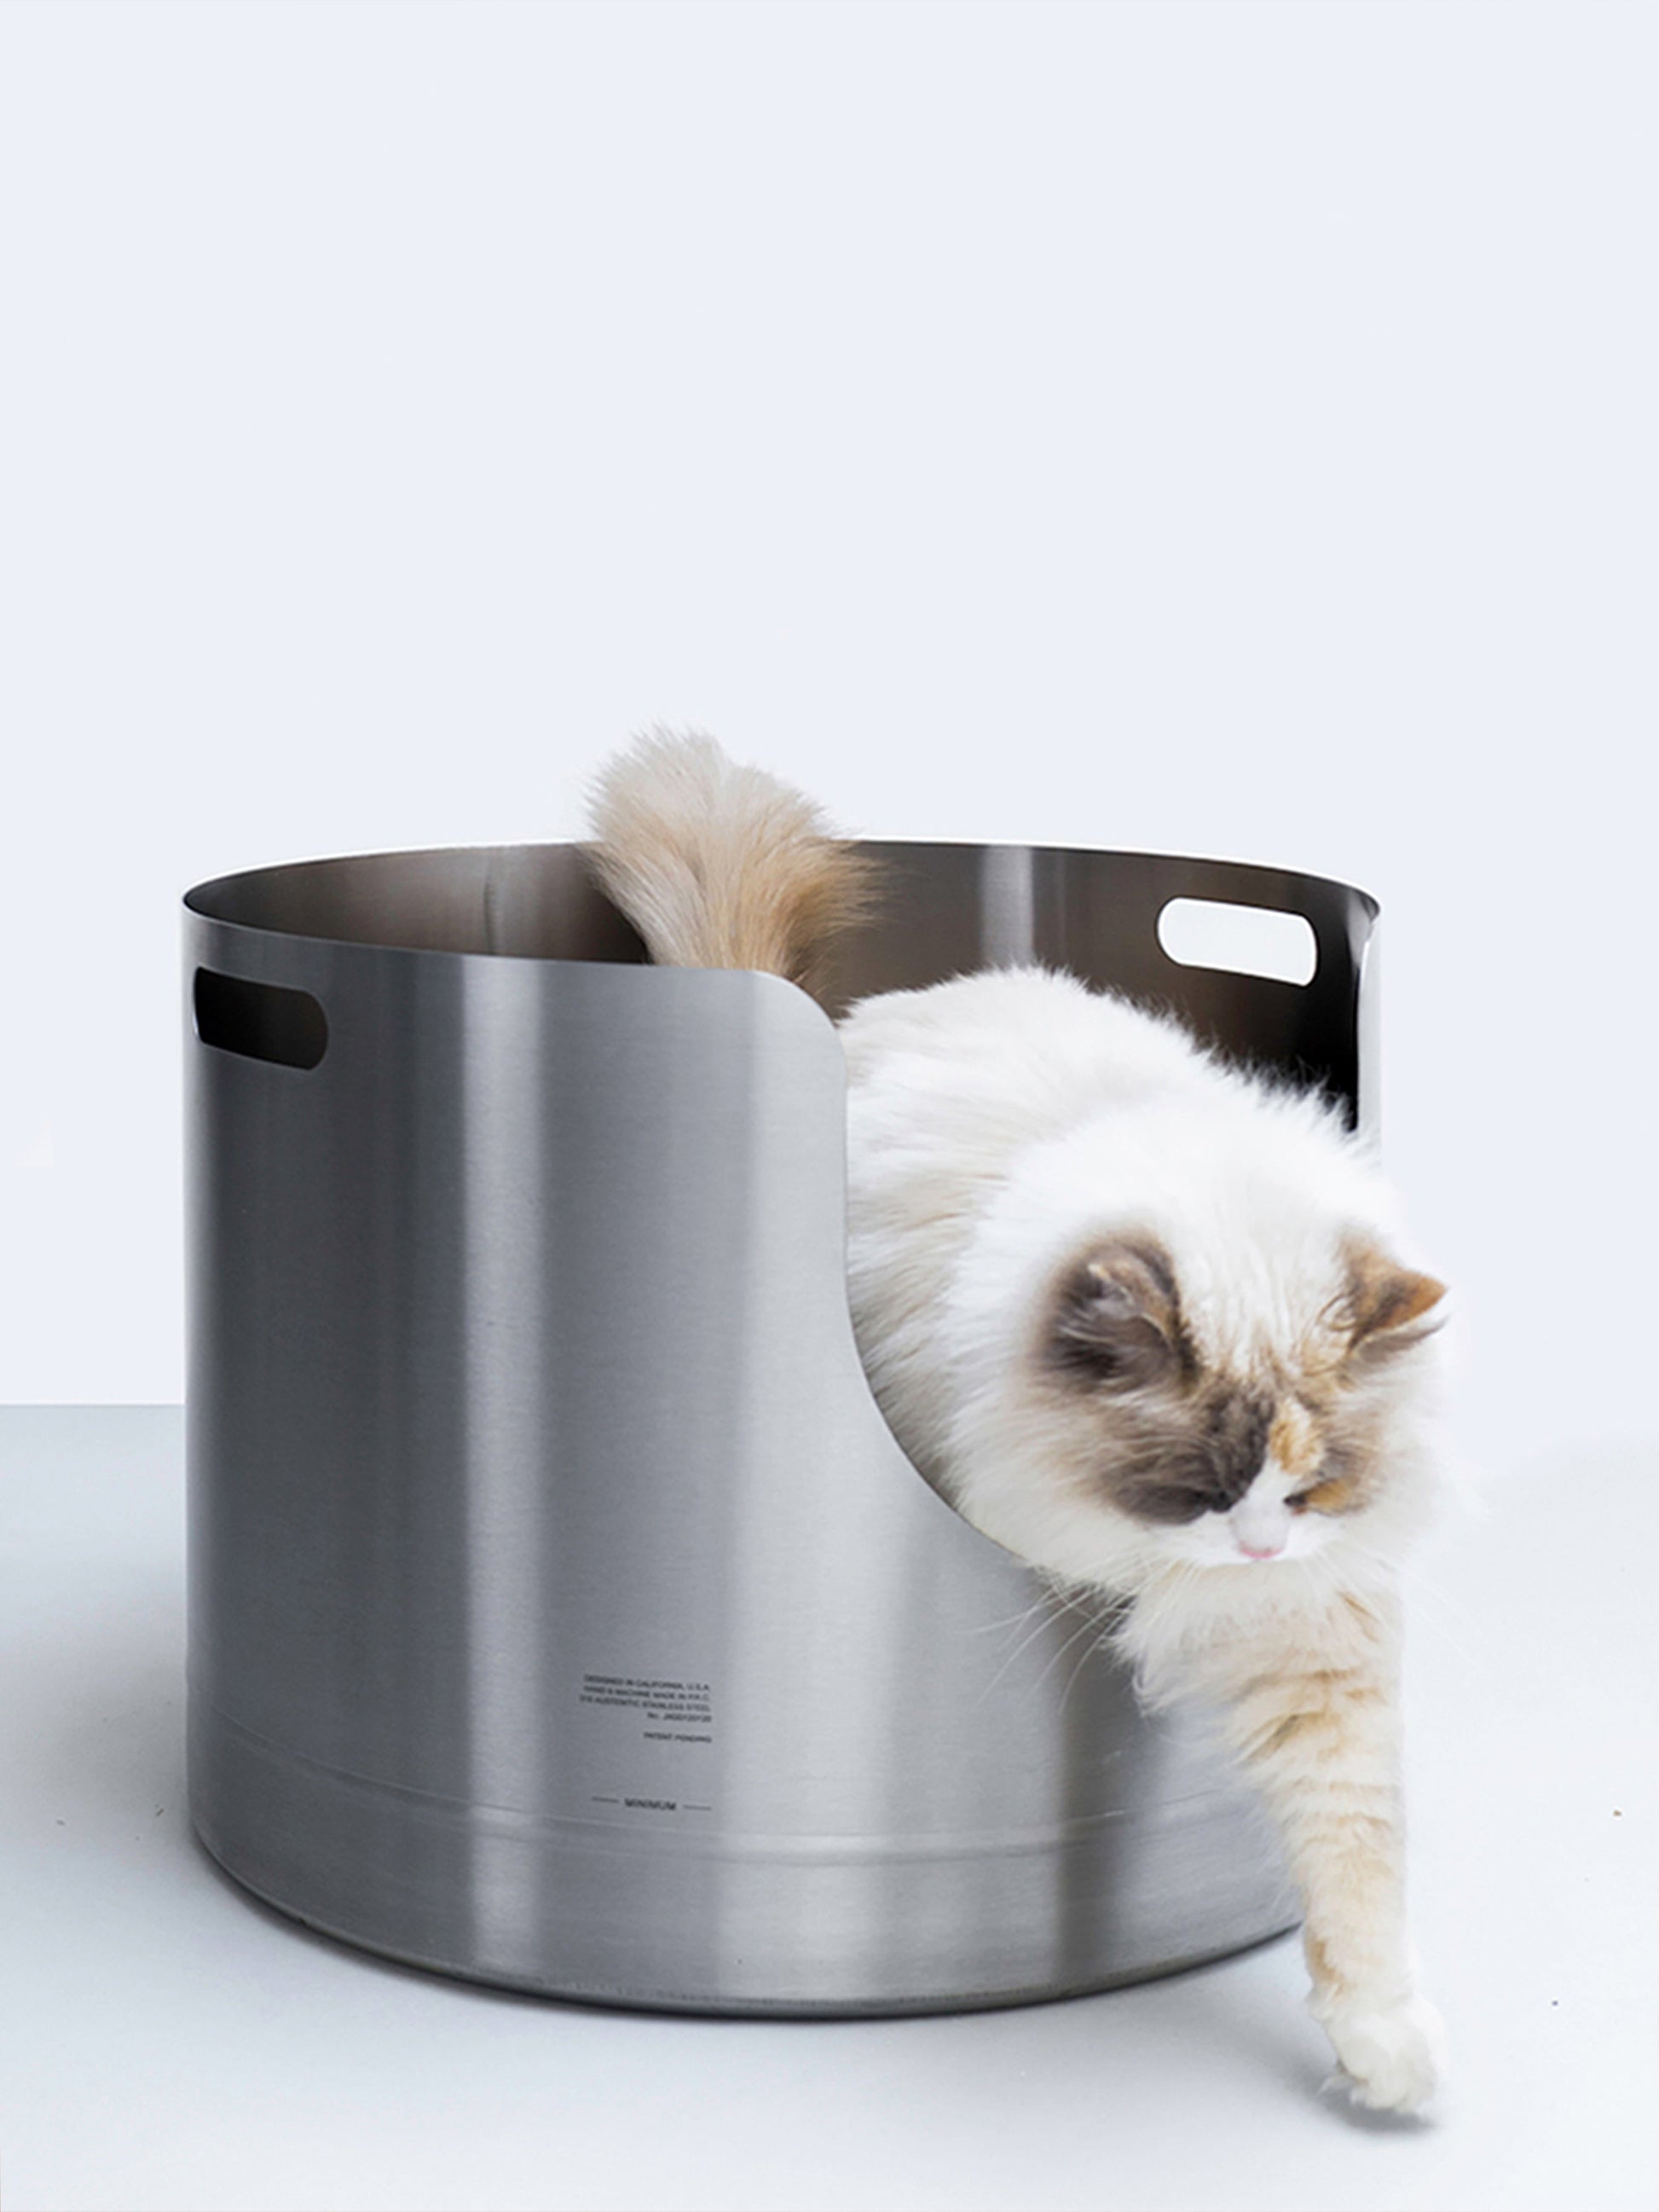 high-wall, high-side, extra large stainless steel litter box